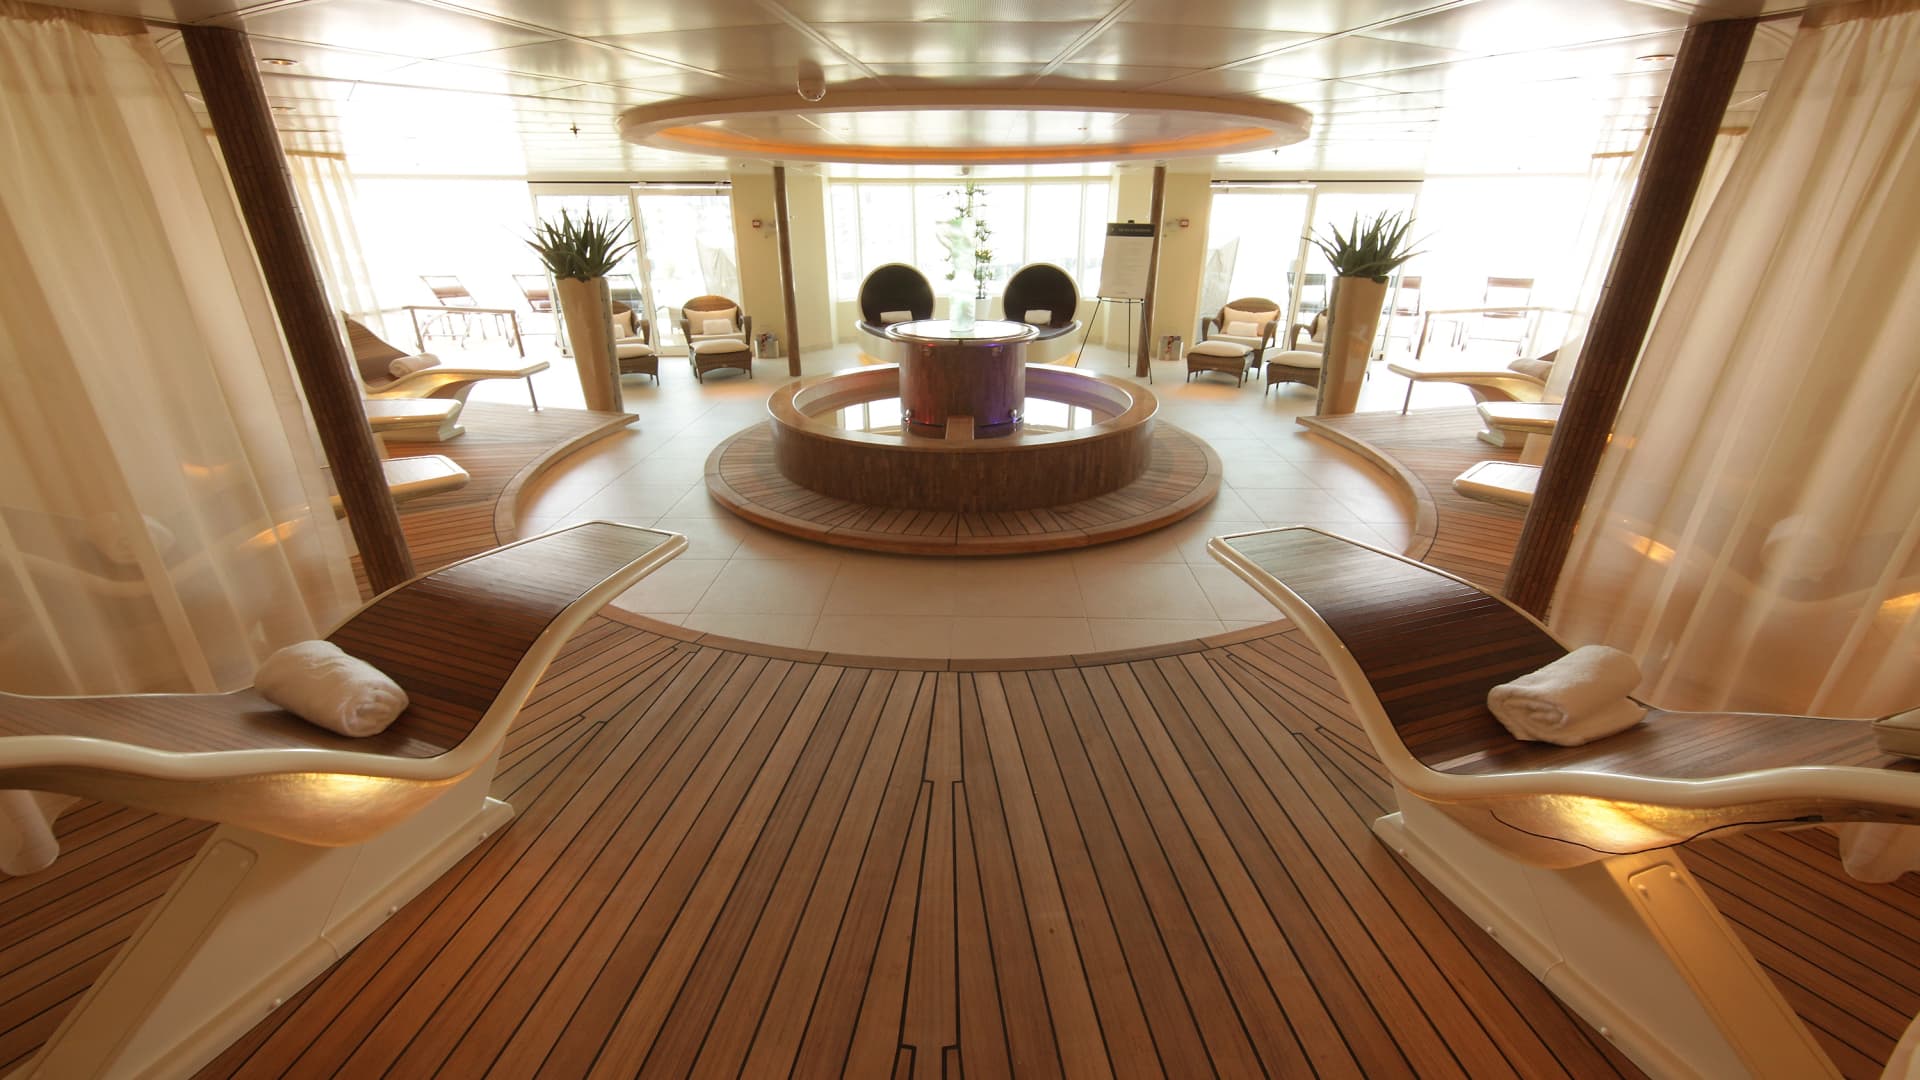 The spa in the luxury Seabourn Sojourn cruise ship.